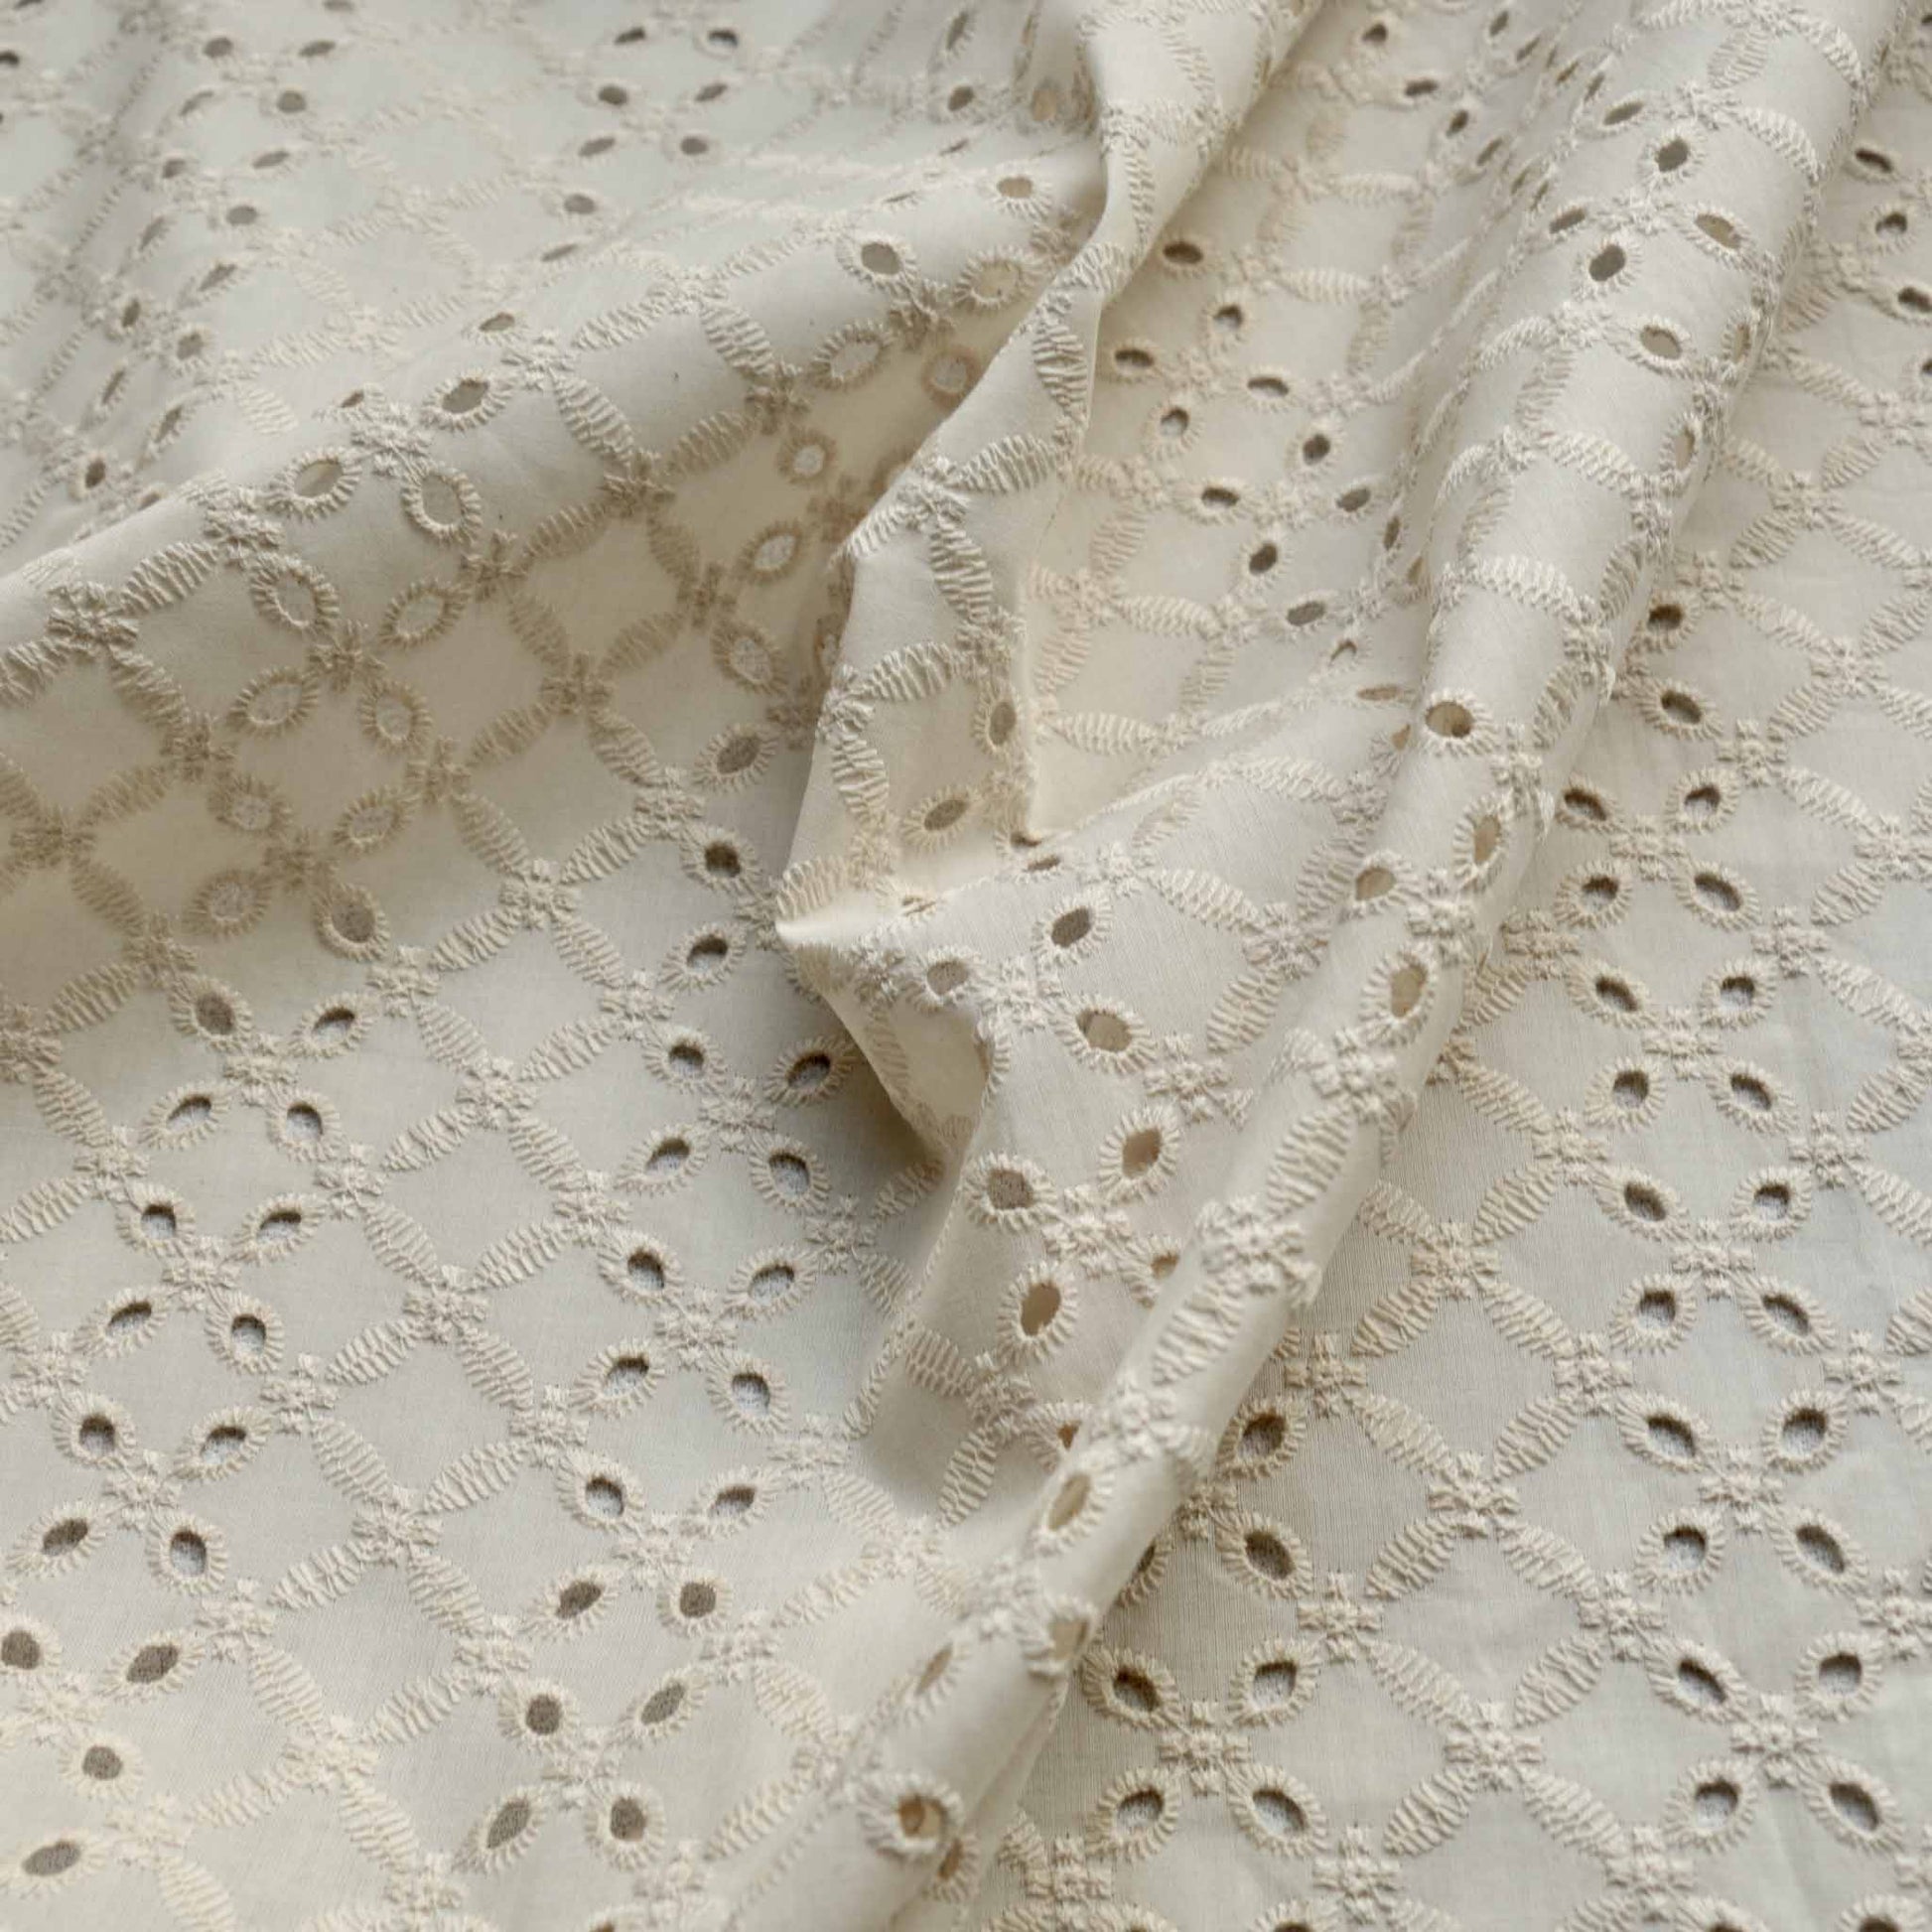 4 hole broad anglaise ivory dressmaking fabric with vanilla embroidery design